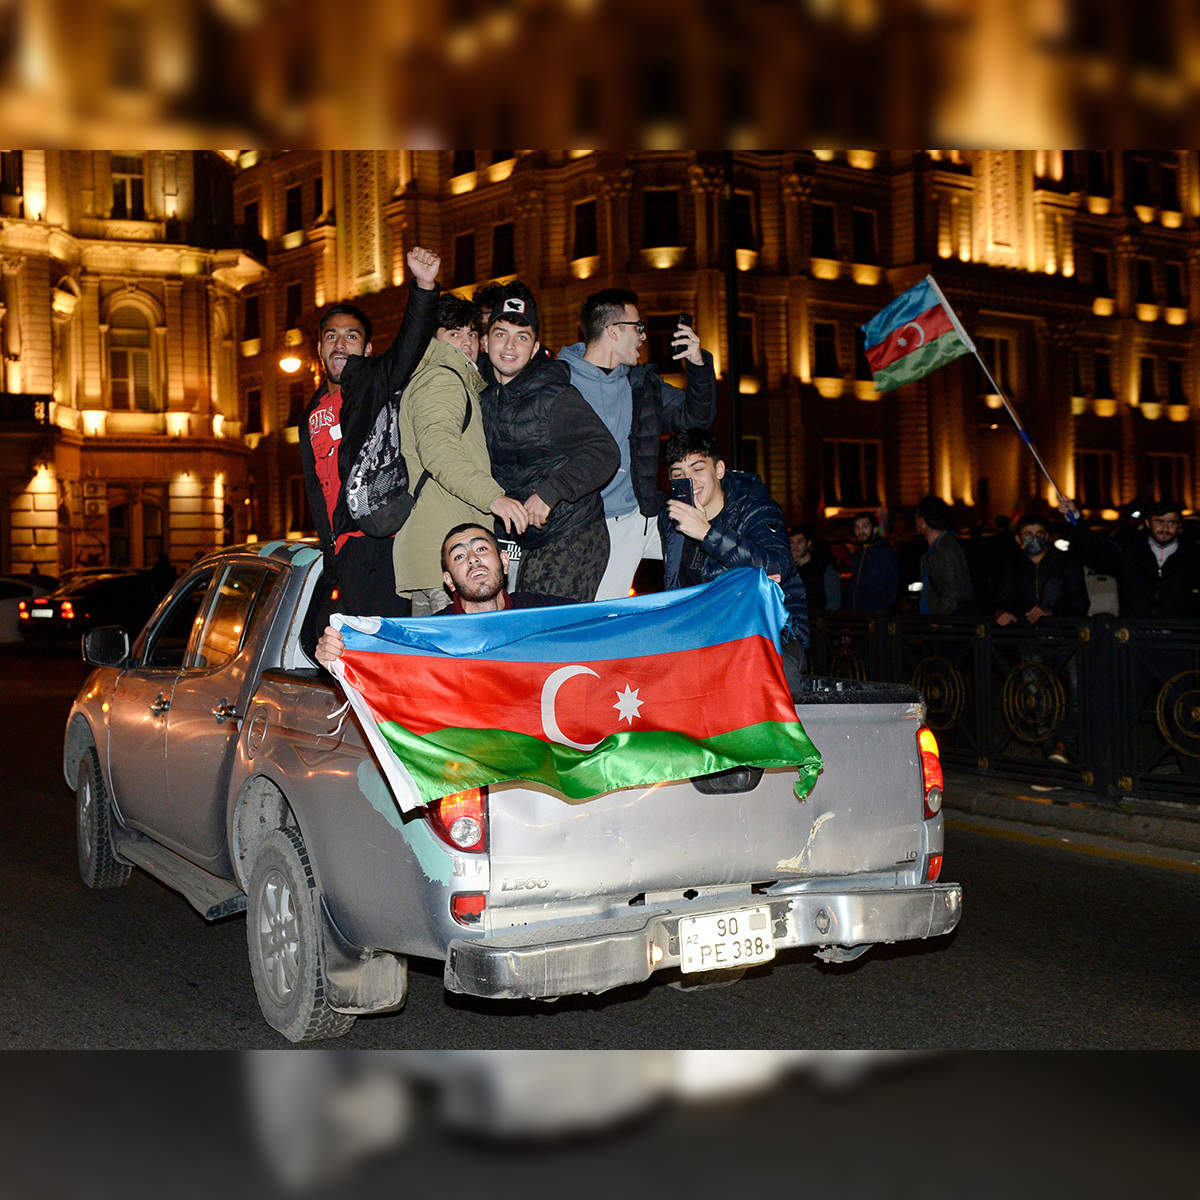 Azerbaijan's victory over Armenian enclave raises fears of another war